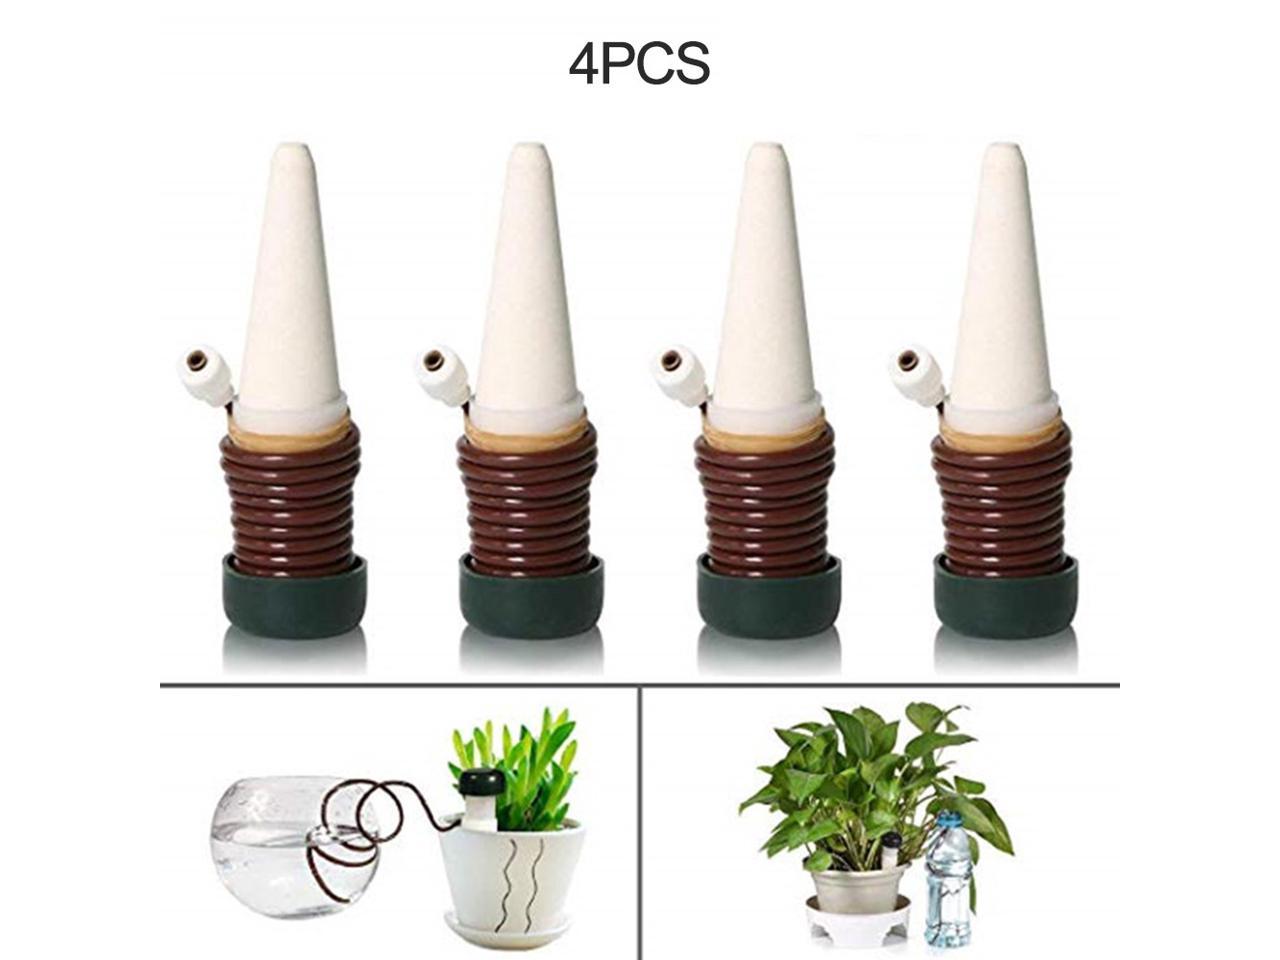 4 x Garden Watering Spikes Plant Waterers for Holiday Bottle Irrigation System 